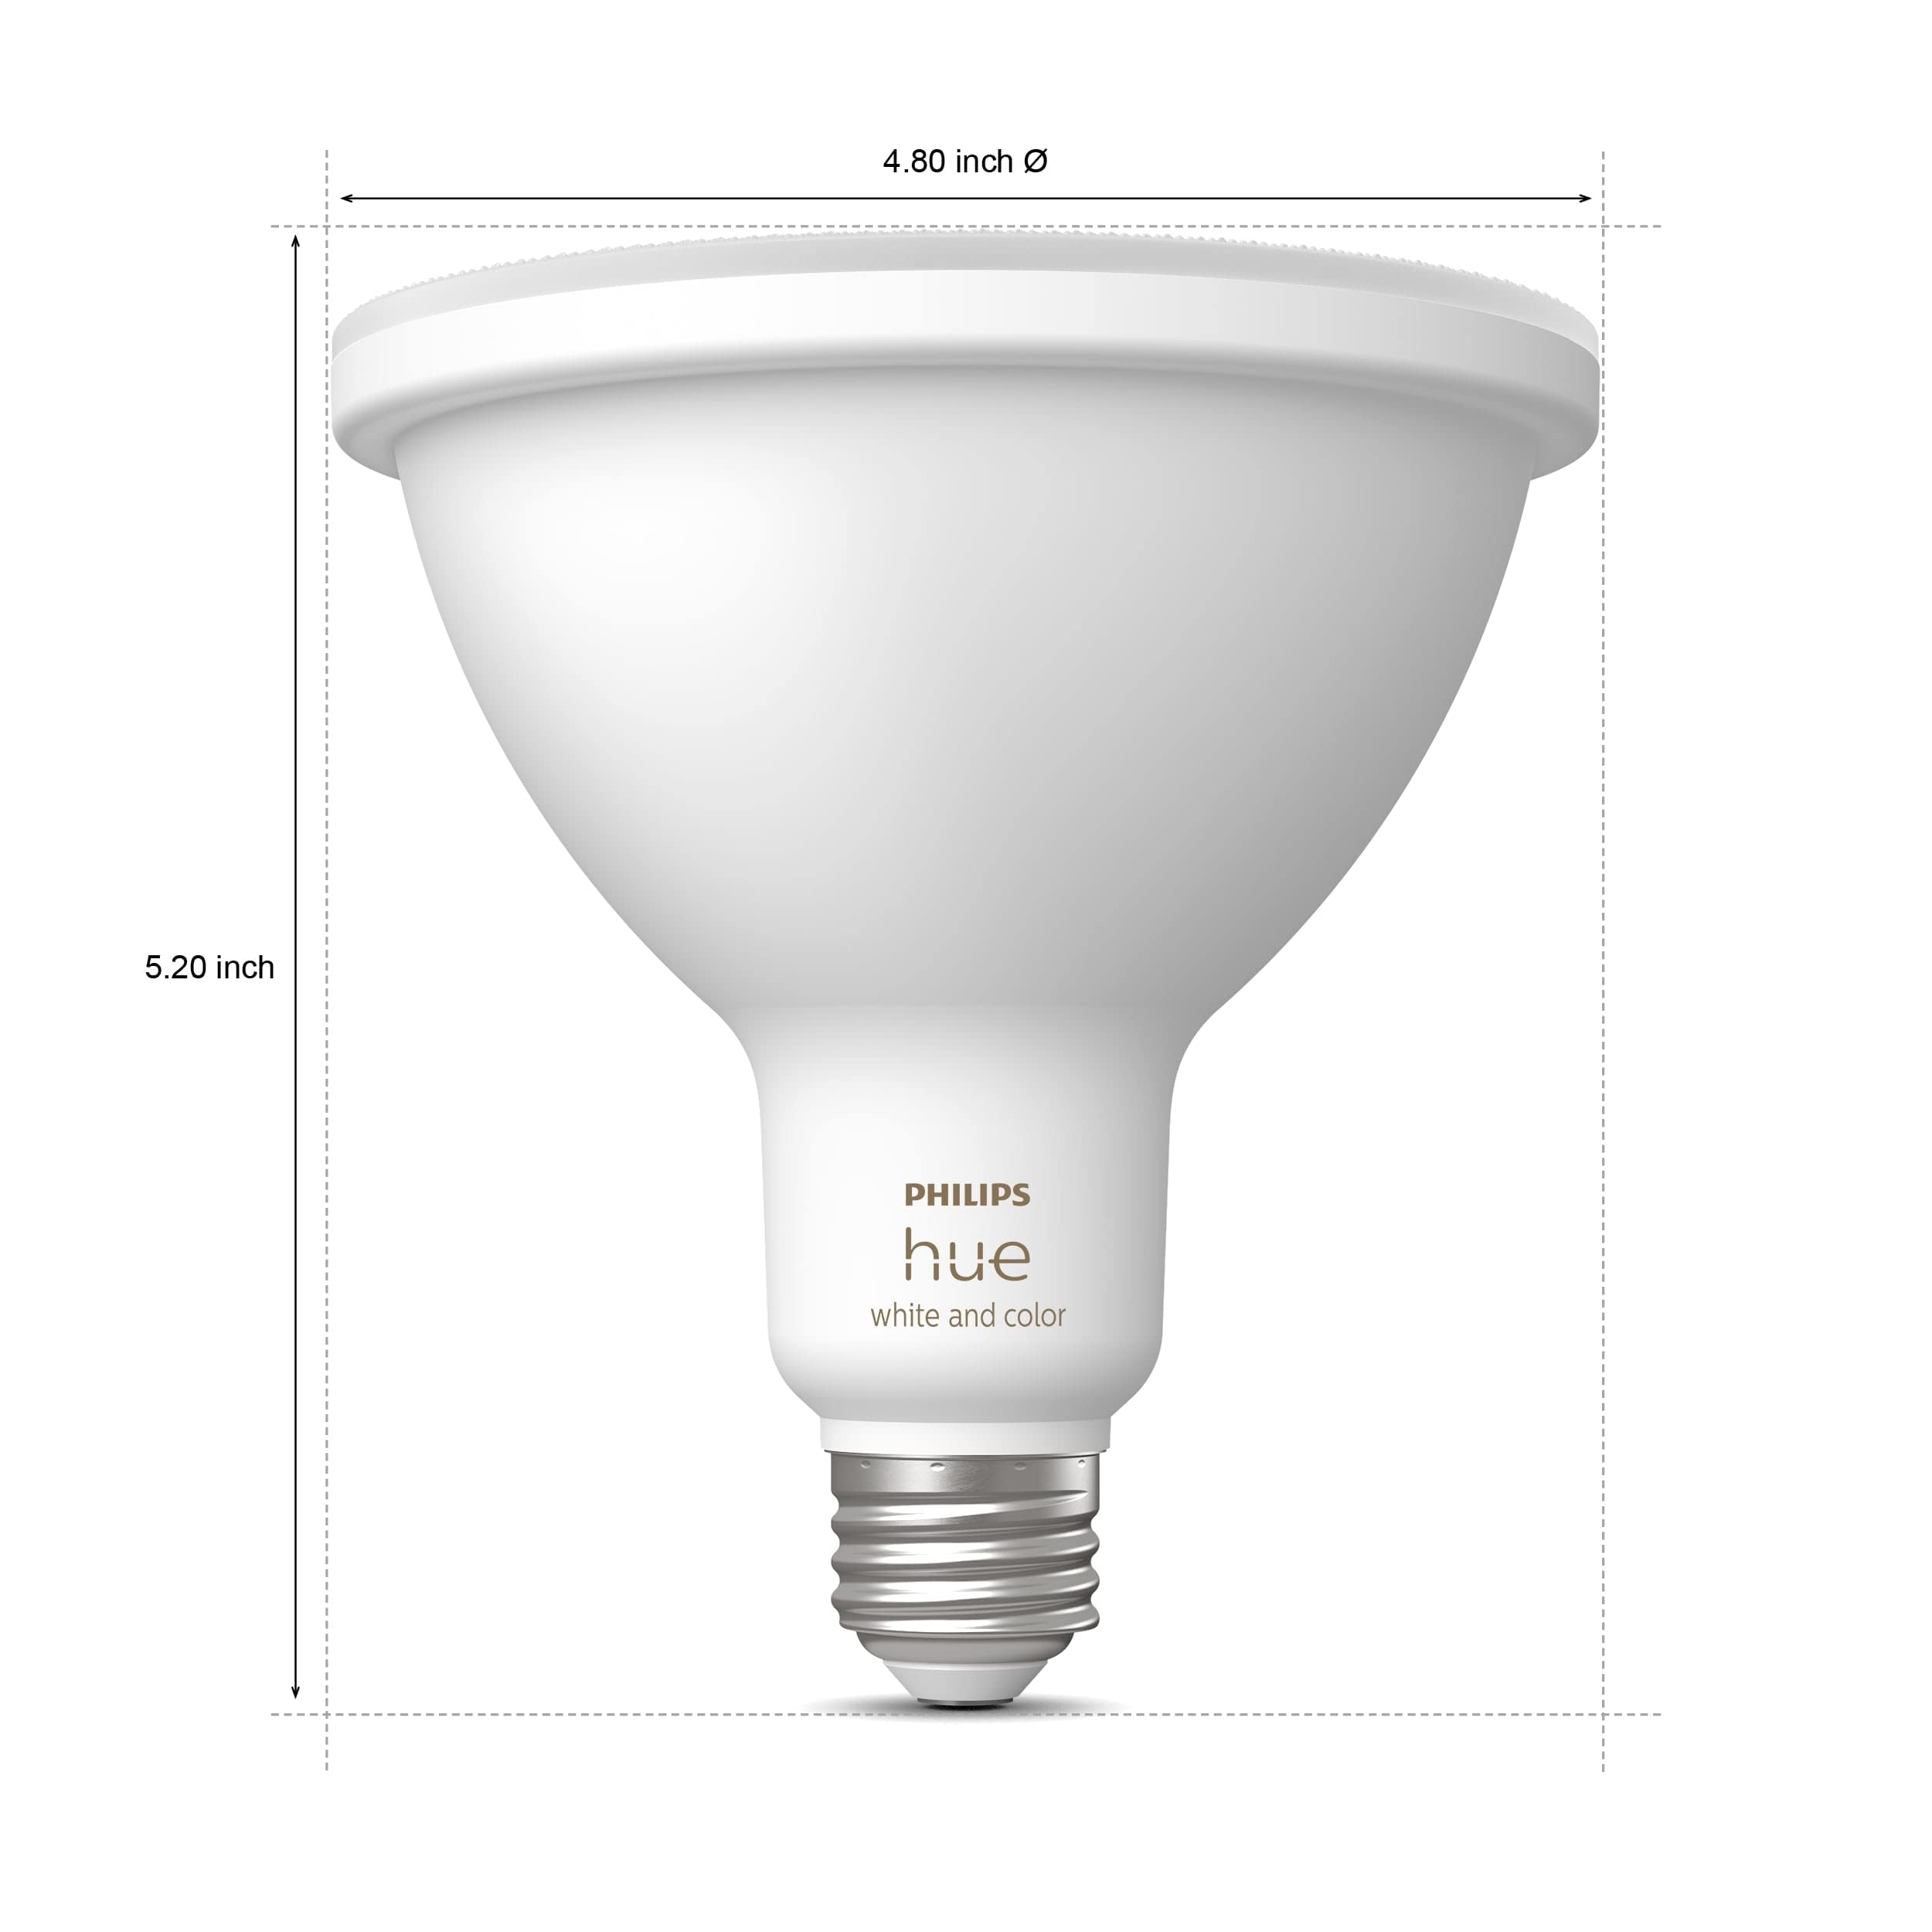 Philips Hue White and Color Ambiance PAR38 Outdoor Spotlight, Single Bulb, Requires Hue Bridge, Compatible with Alexa, Apple HomeKit and Google Assistant